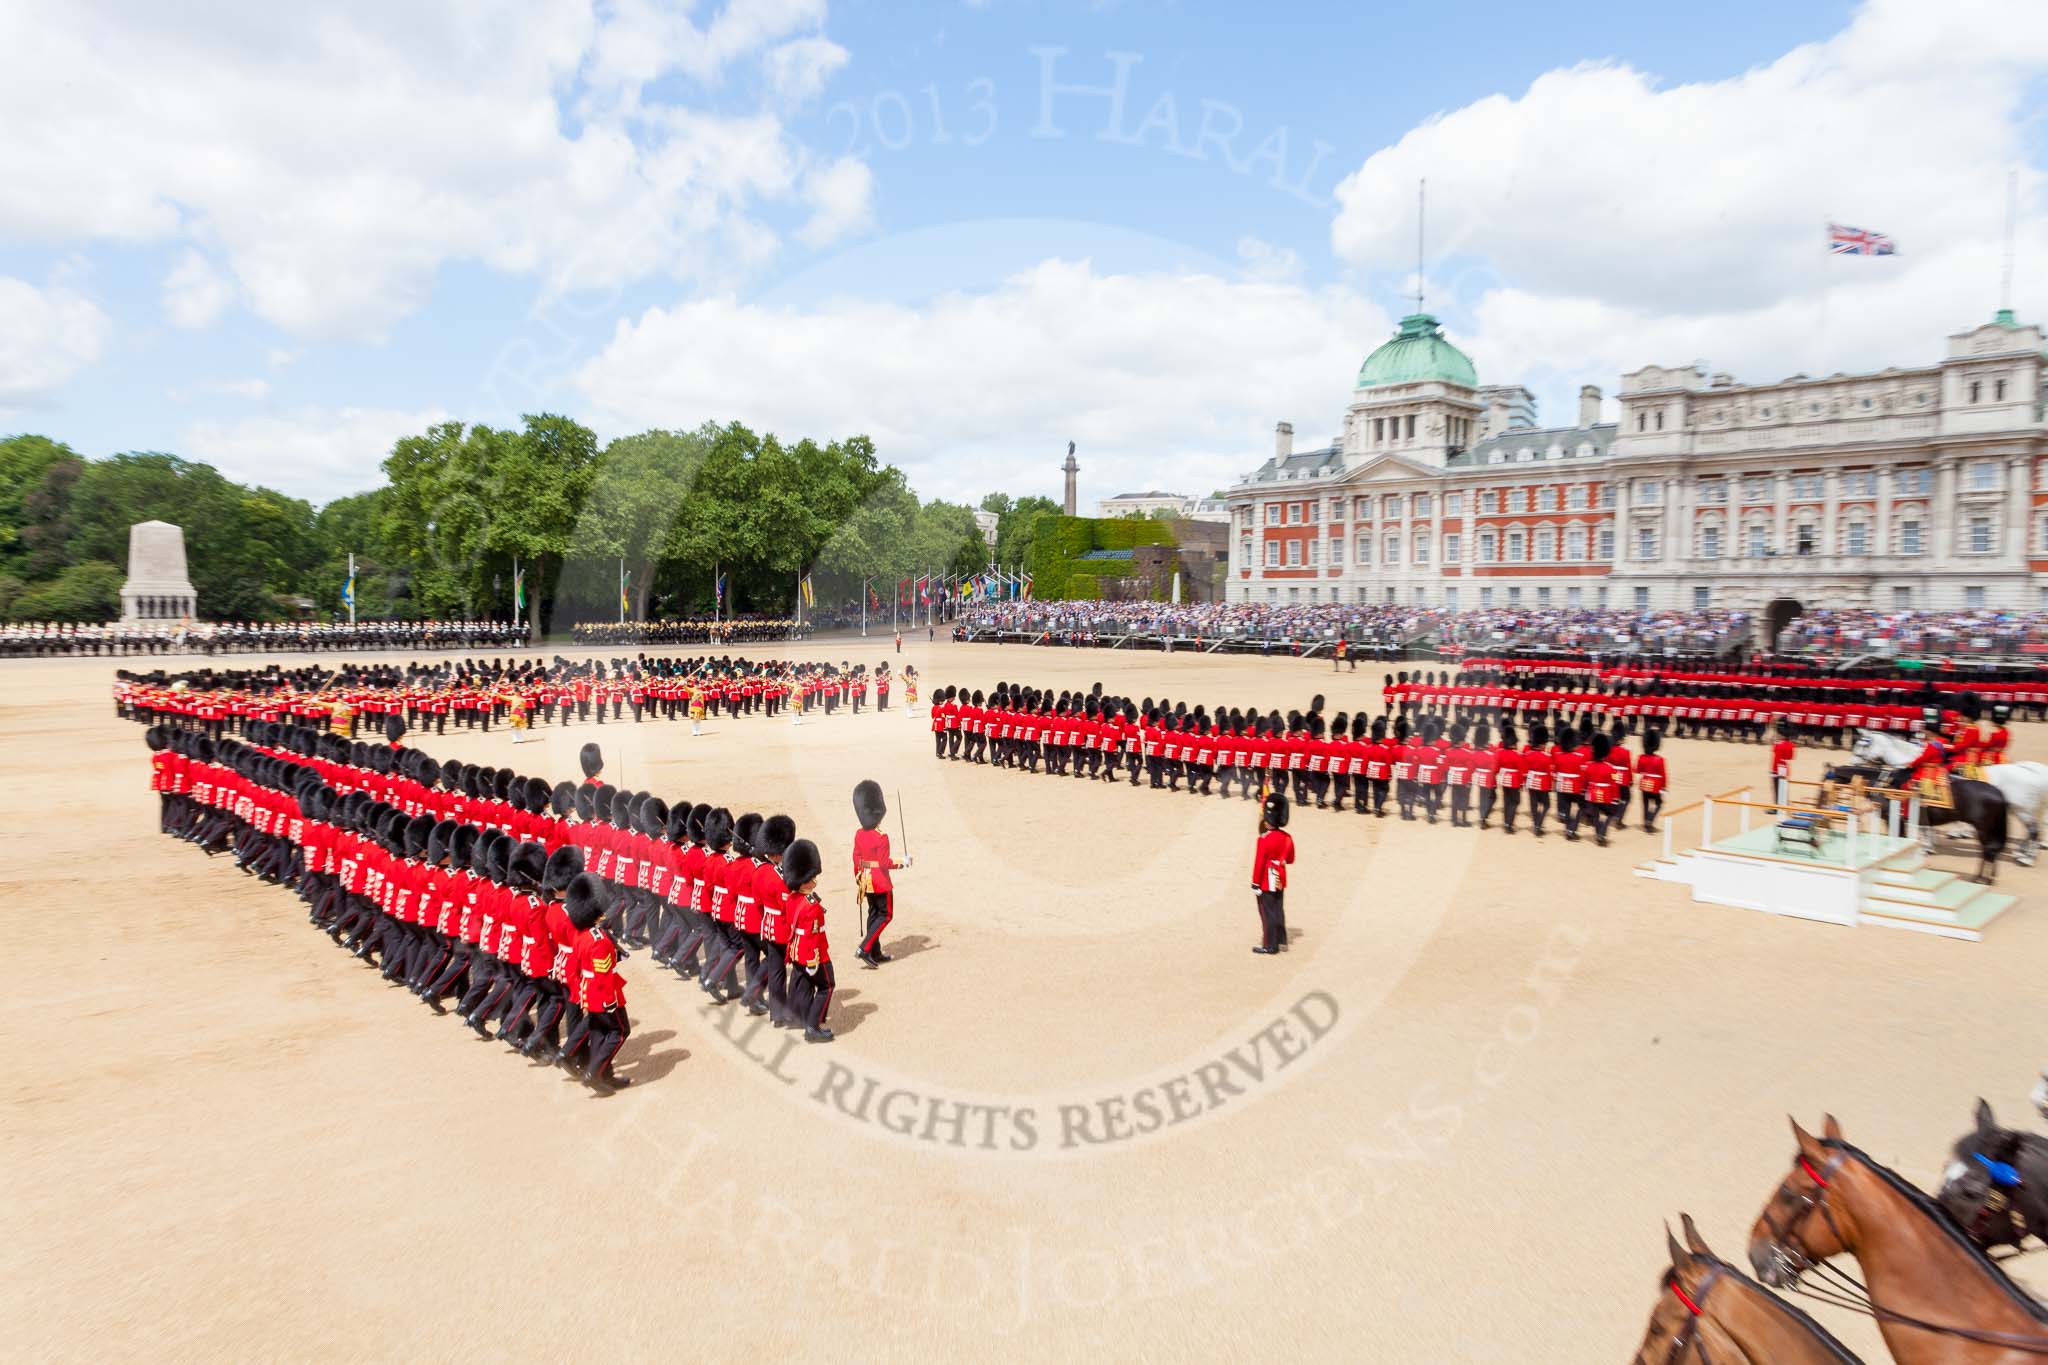 The Colonel's Review 2015.
Horse Guards Parade, Westminster,
London,

United Kingdom,
on 06 June 2015 at 11:36, image #391